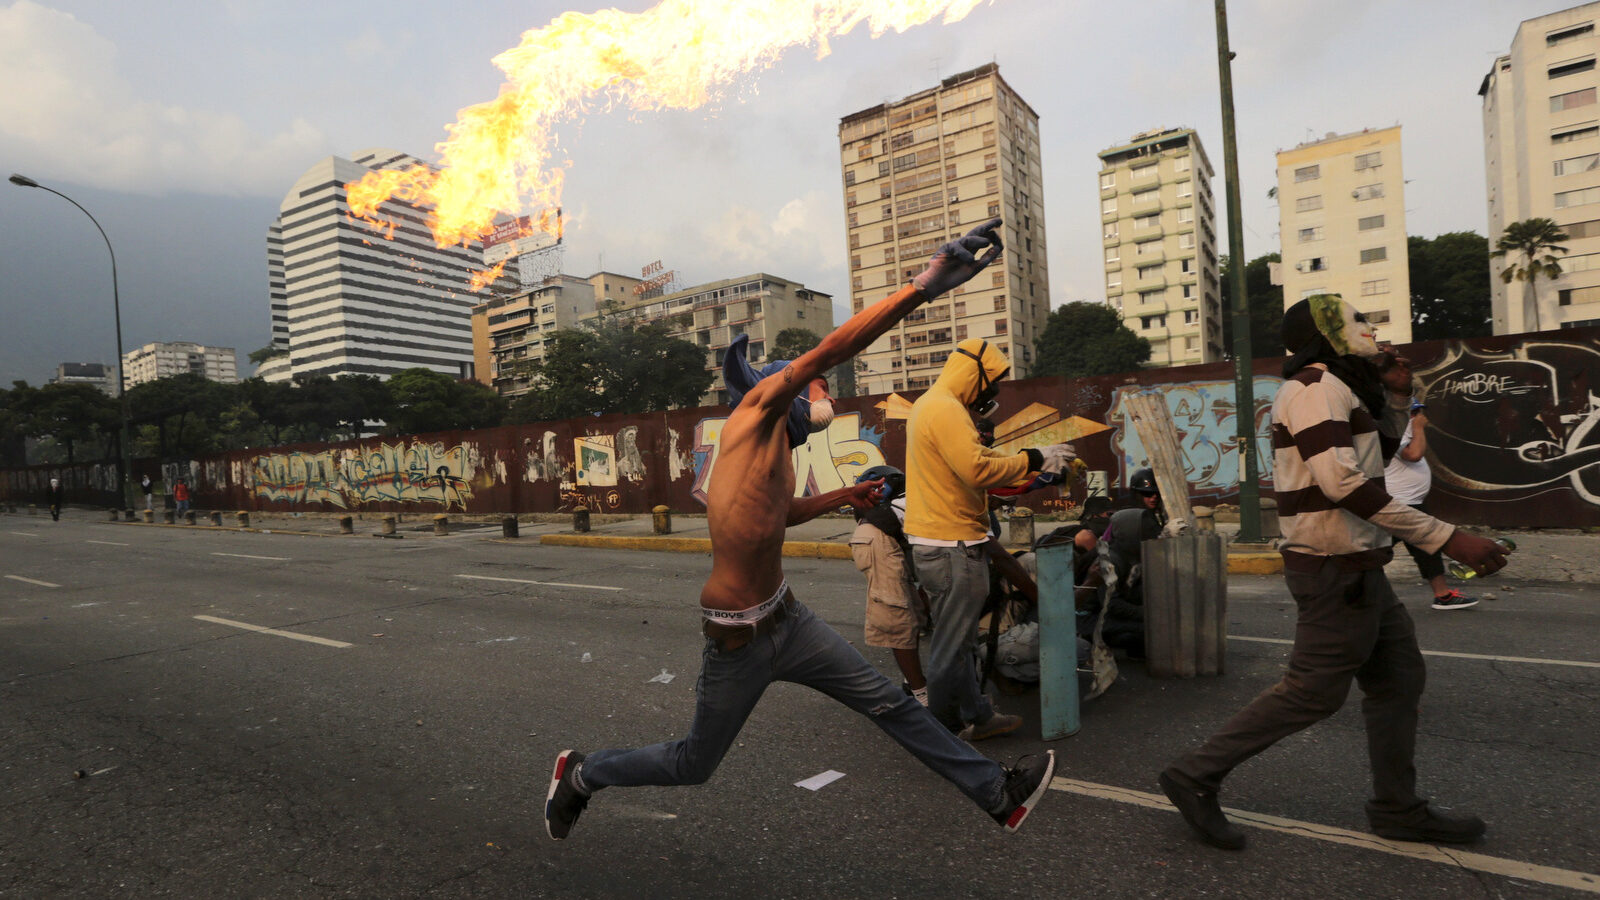 An anti-government protesters throws a molotov bomb at security forces in Caracas, Venezuela, Wednesday, April 19, 2017. Tens of thousands of opponents of President Nicolas Maduro flooded the streets of Caracas in what's been dubbed the "mother of all marches" against the embattled socialist president. (AP/Fernando Llano)